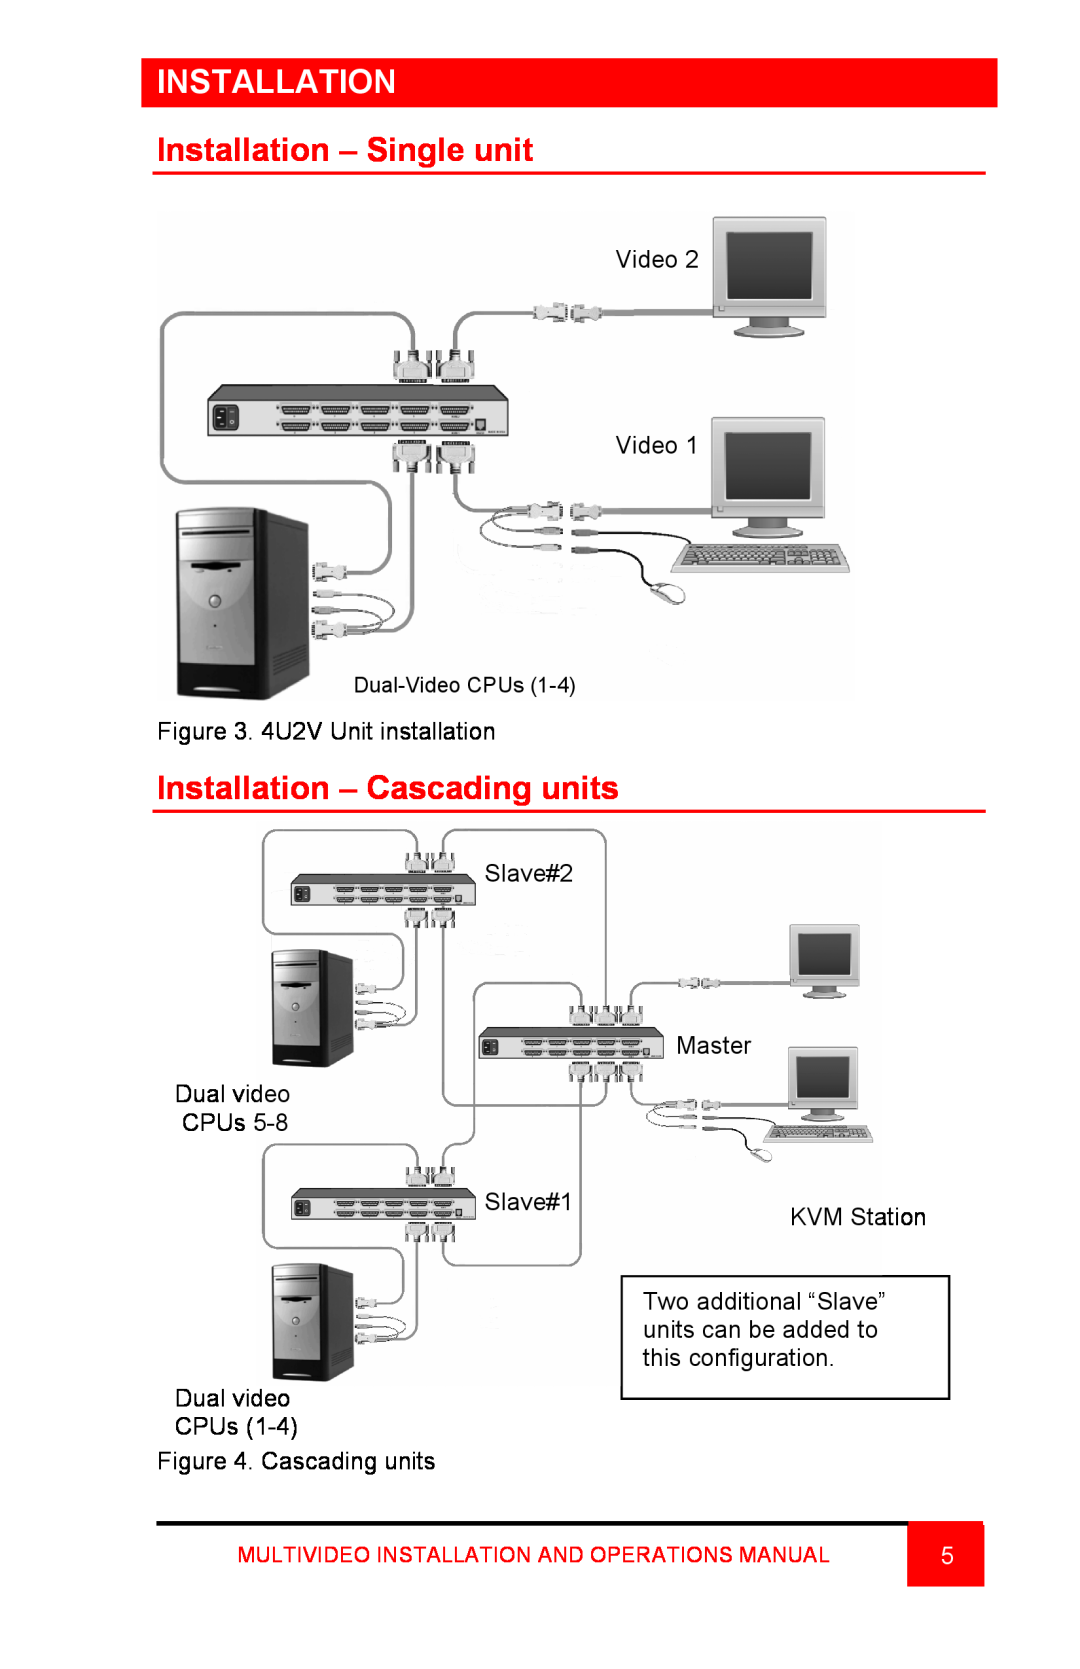 Rose electronic Video Easyware manual Installation - Single unit, Installation - Cascading units, Dual-Video CPUs 